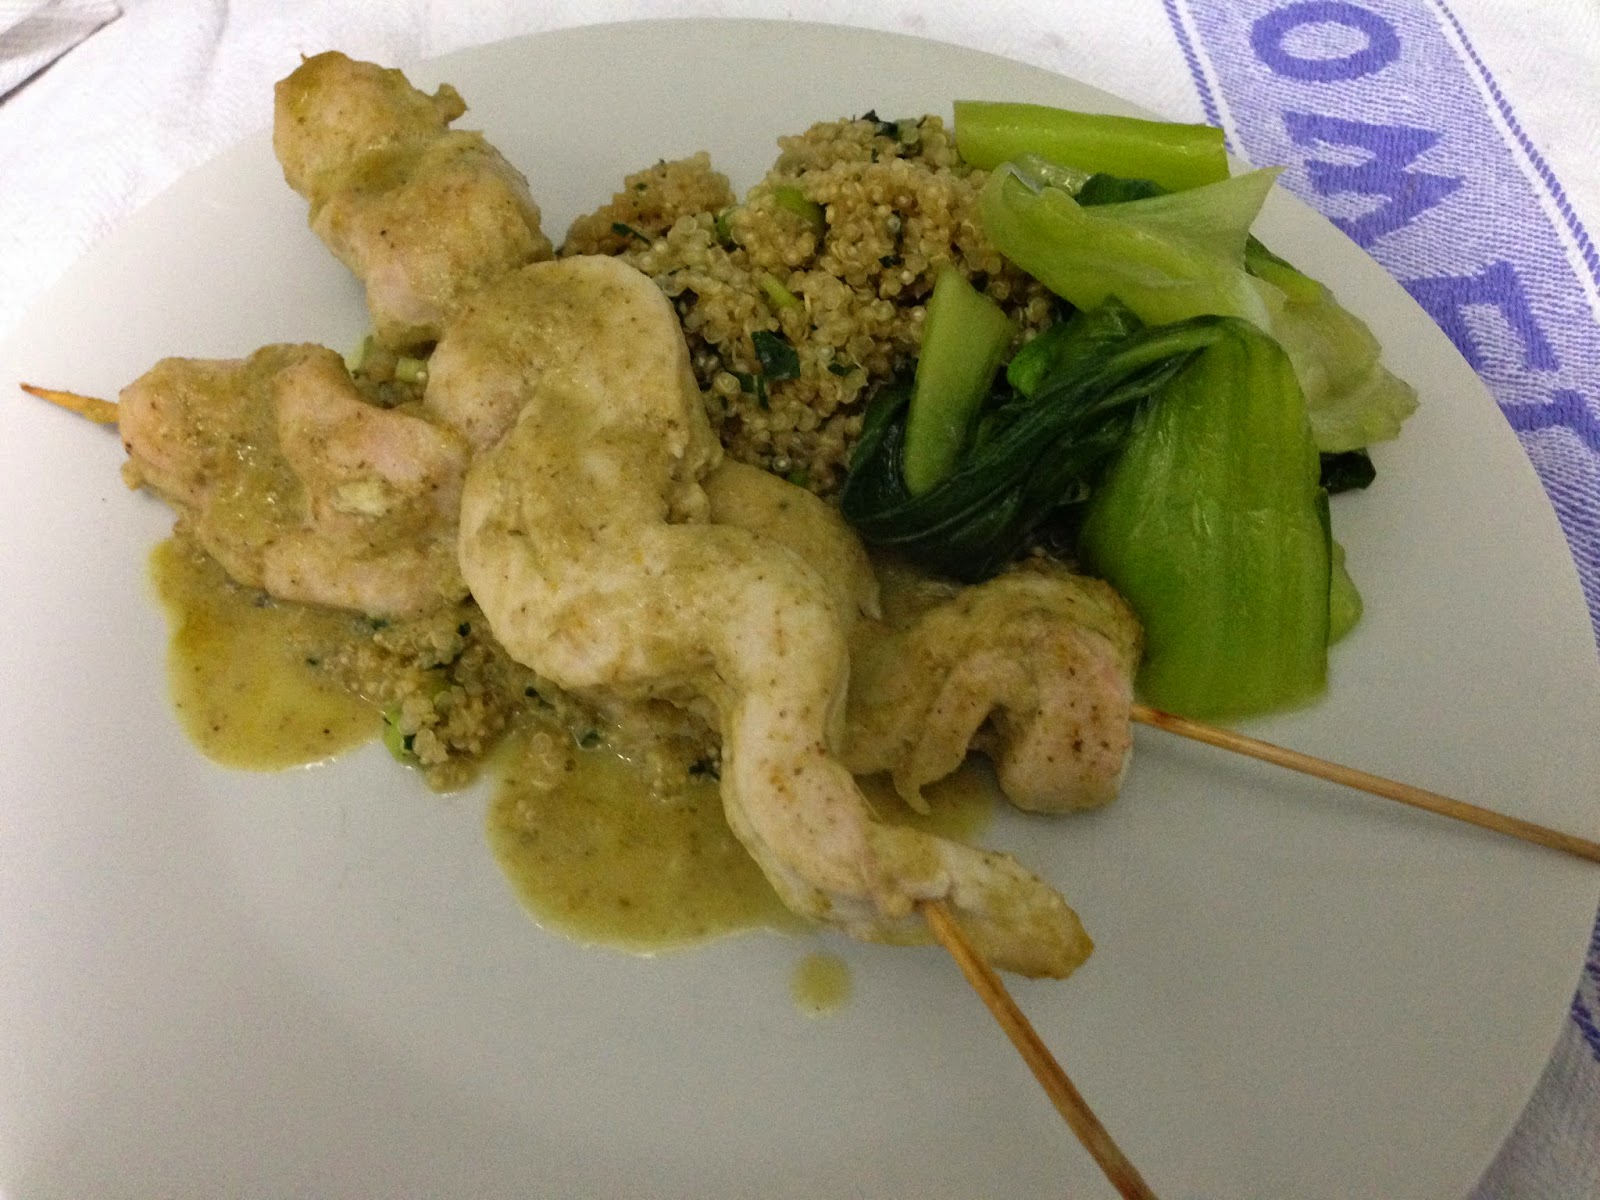 Thai green chicken skewers with ginger quinoa from Donna Hay's book Fresh and Light.